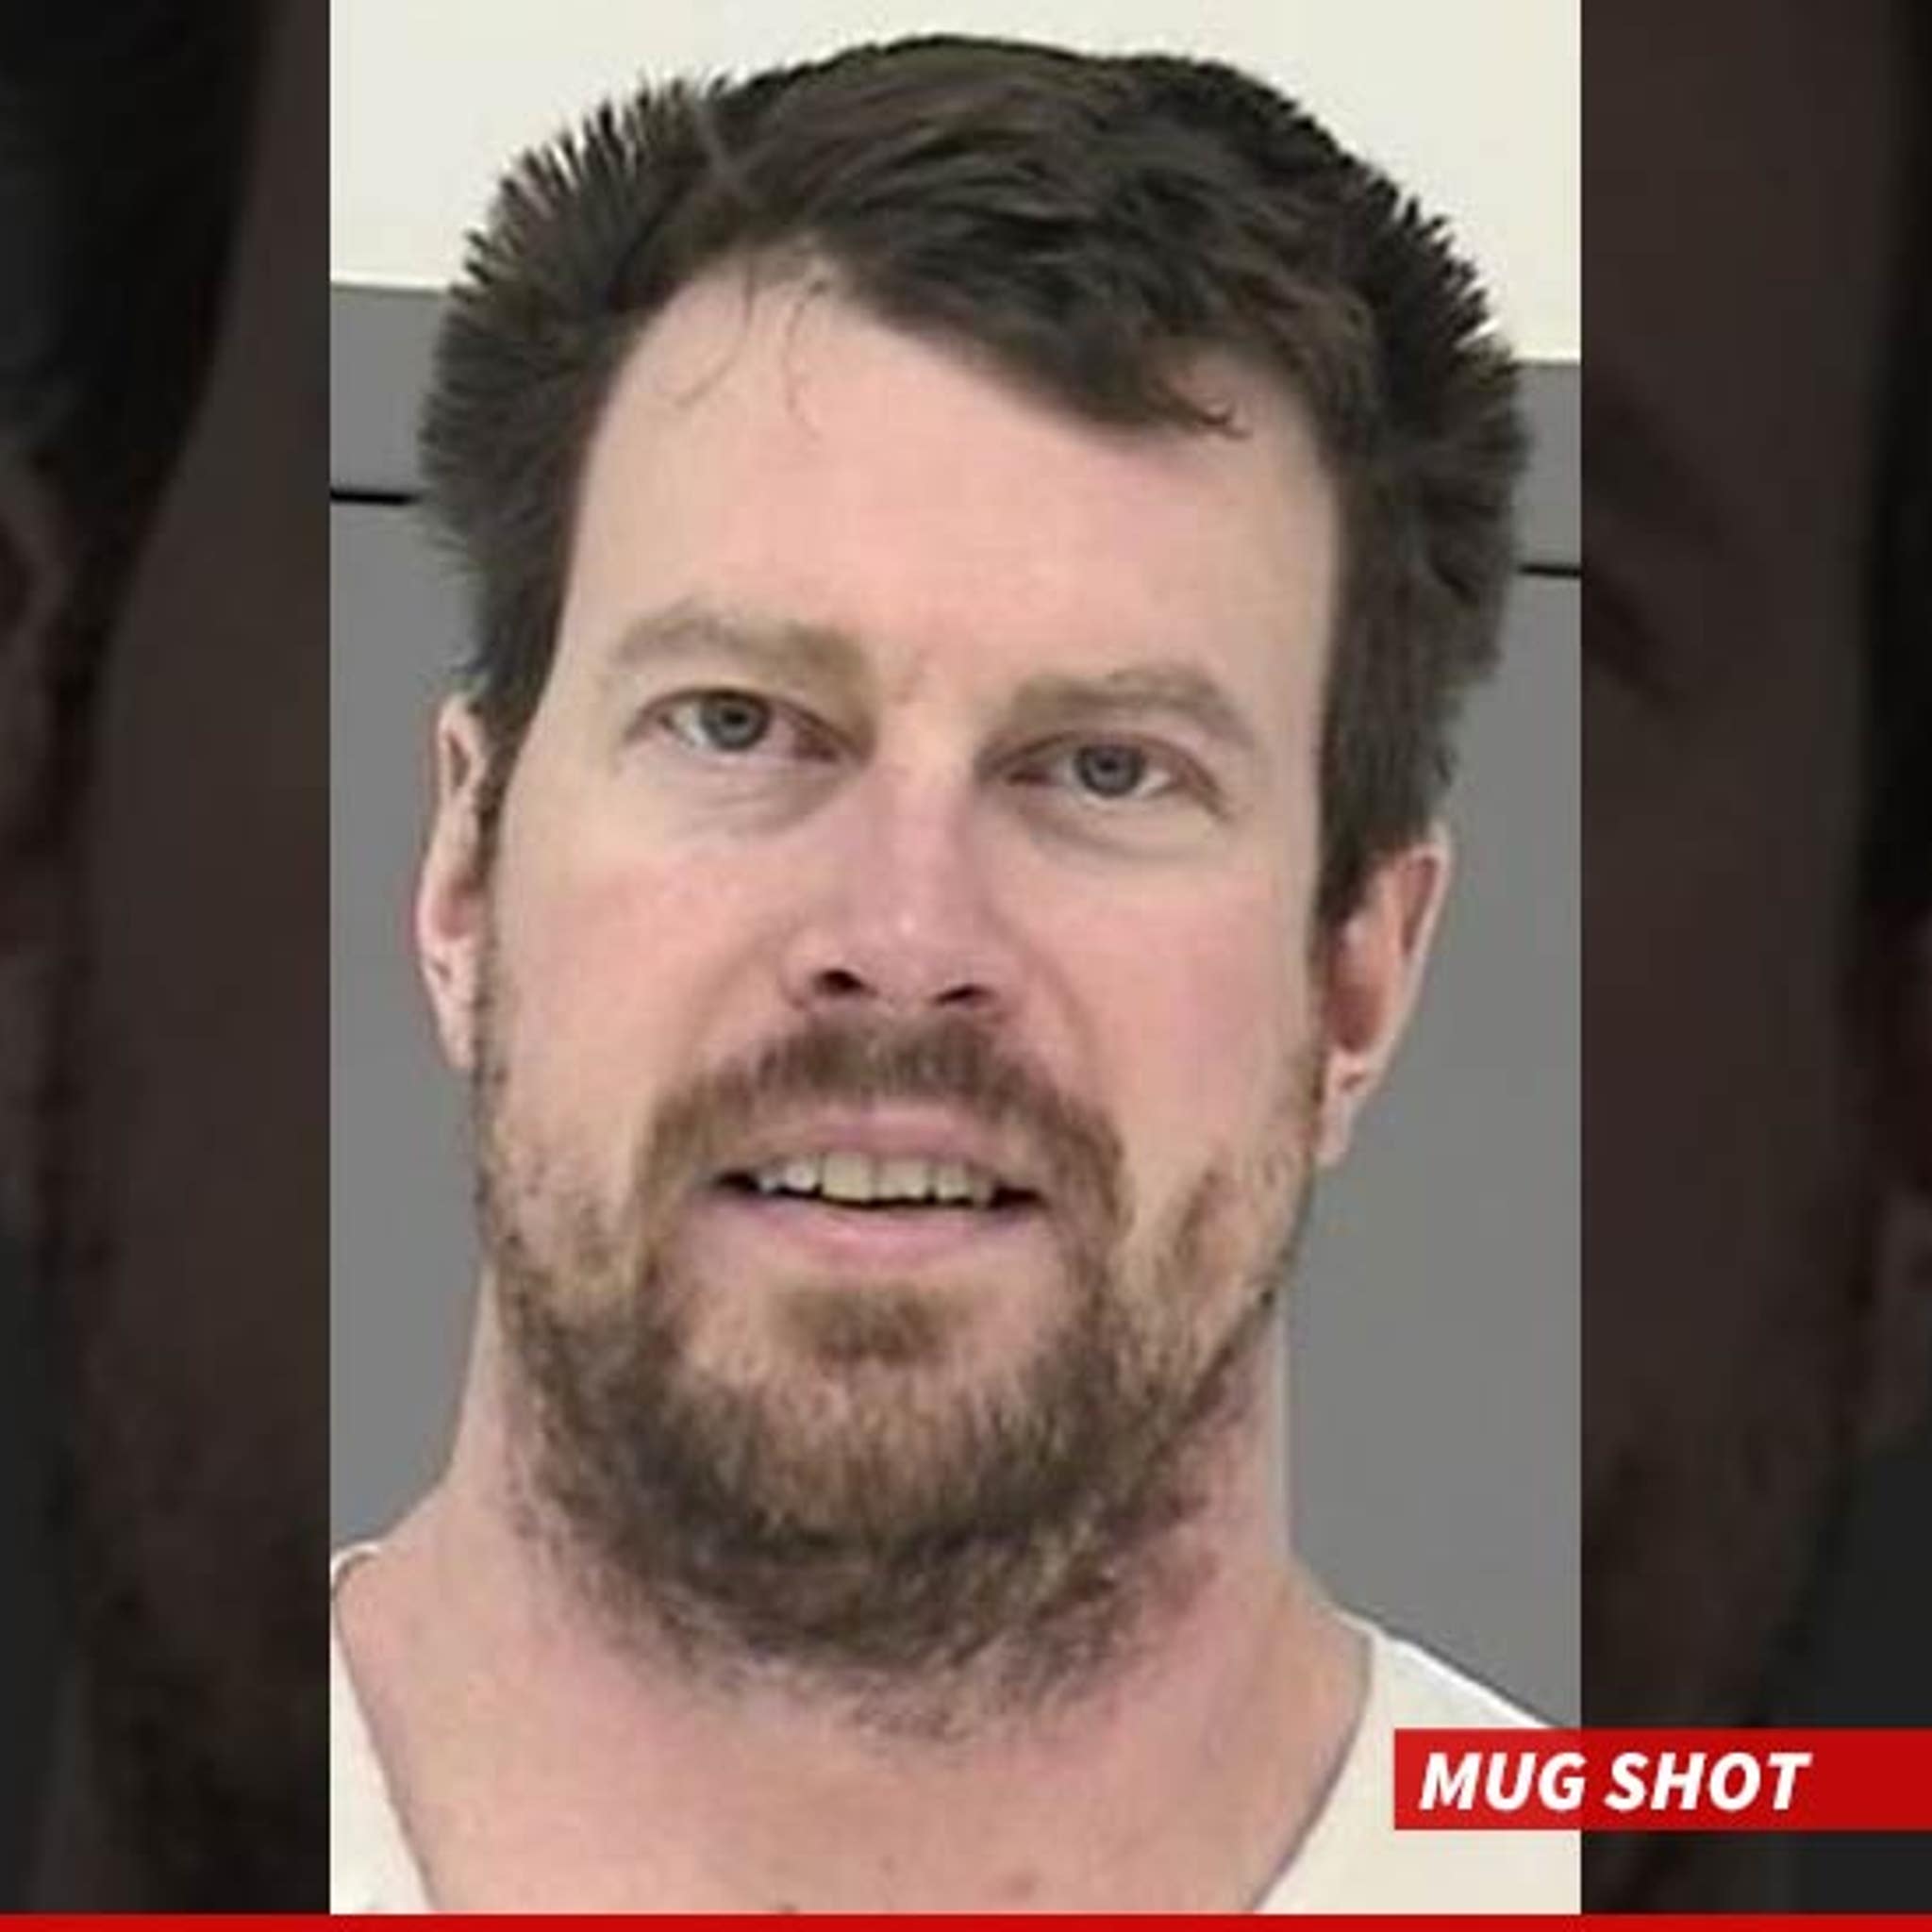 Former QB Ryan Leaf released from Montana prison